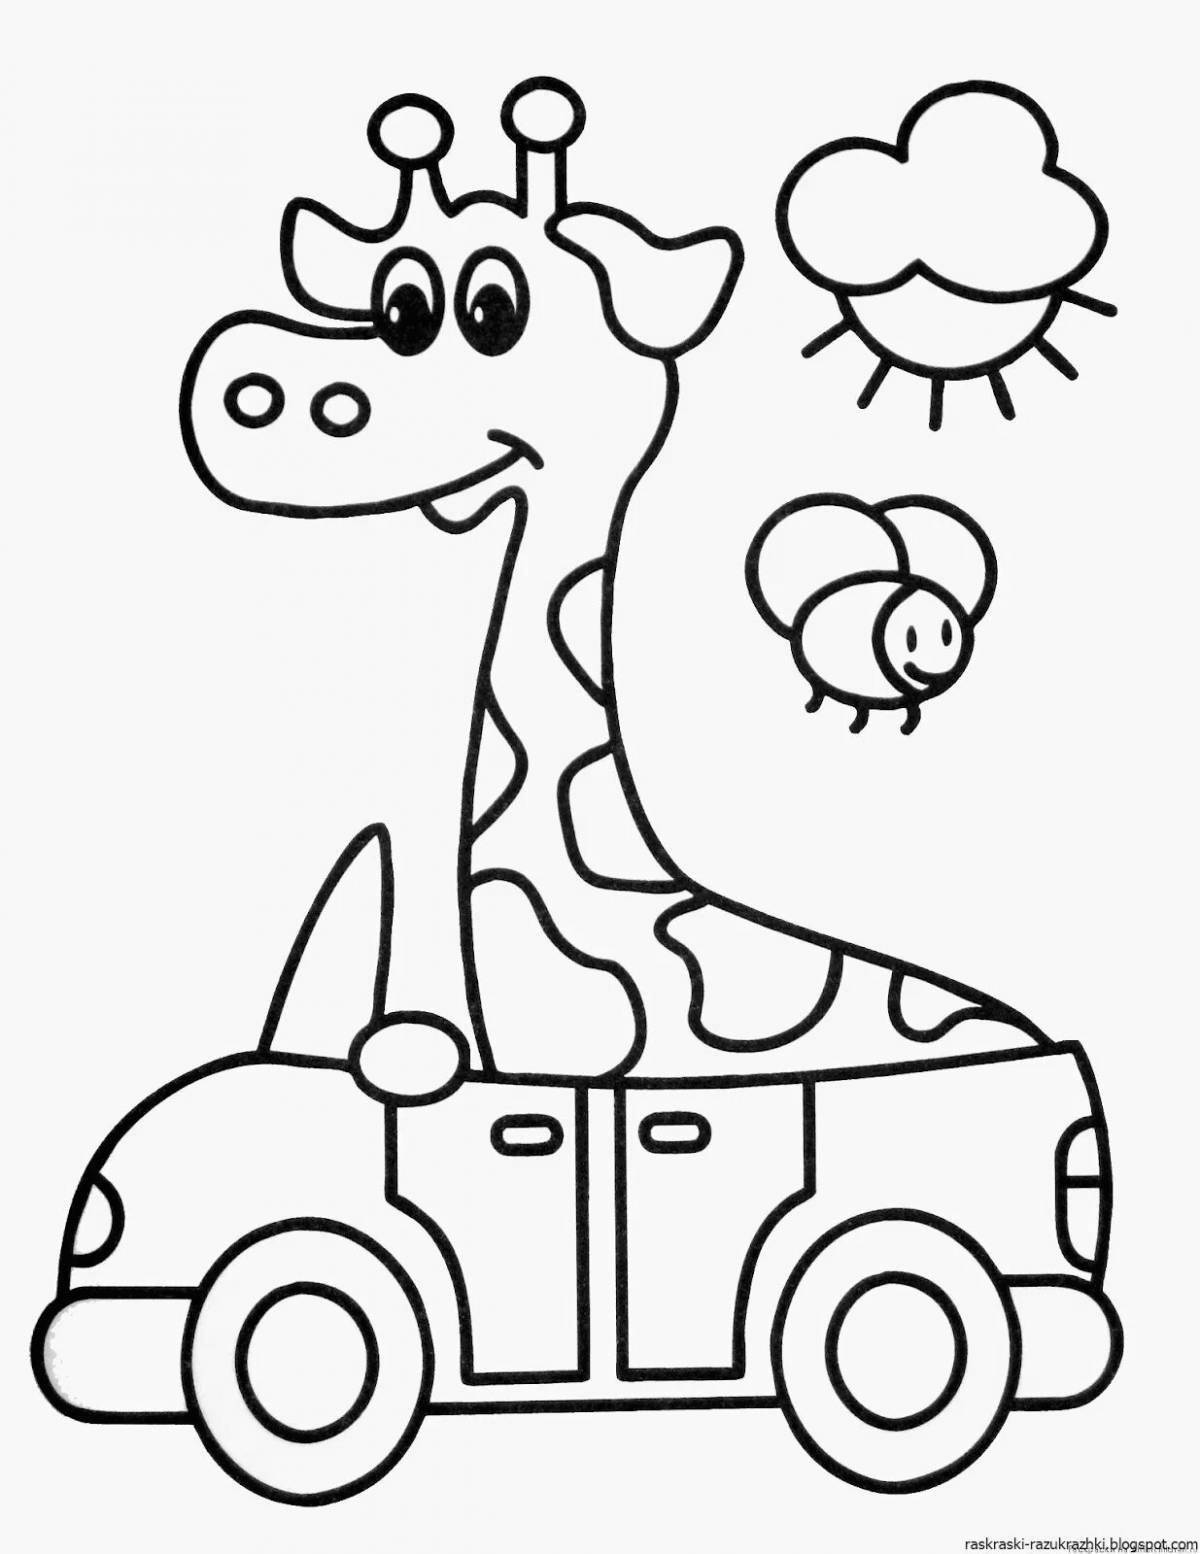 Wonderful cars coloring for kids